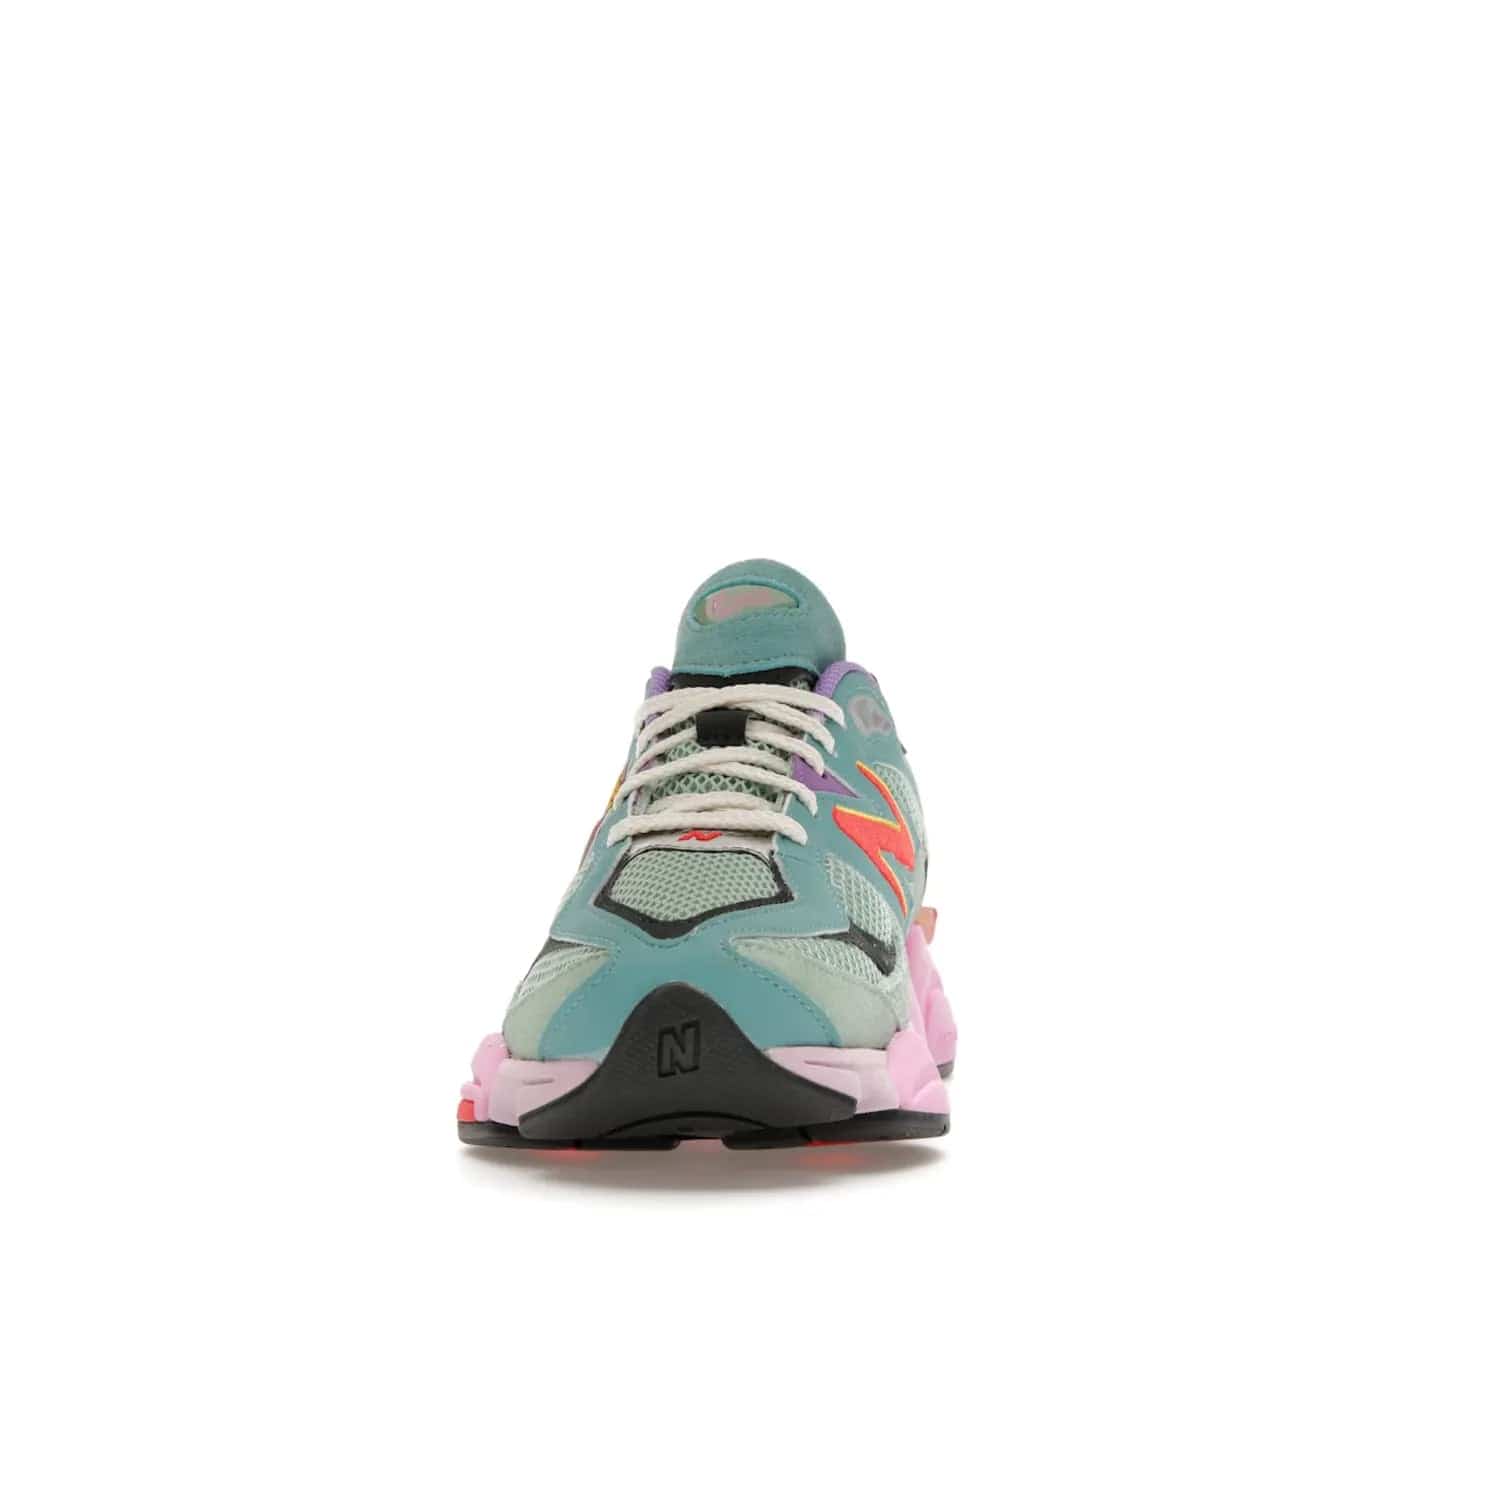 New Balance 9060 Warped Multi-Color - Image 11 - Only at www.BallersClubKickz.com - Enhance your style with the new New Balance 9060 Warped Multi-Colour! Suede overlays, mesh base layer and ABZORB midsole provide comfortable cushioning, while the colourful design ticks all the latest trends. Nylon laces offer an adjustable fit for maximum convenience. Debuting on March 31, 2023 - a must-have addition to your sneaker collection.